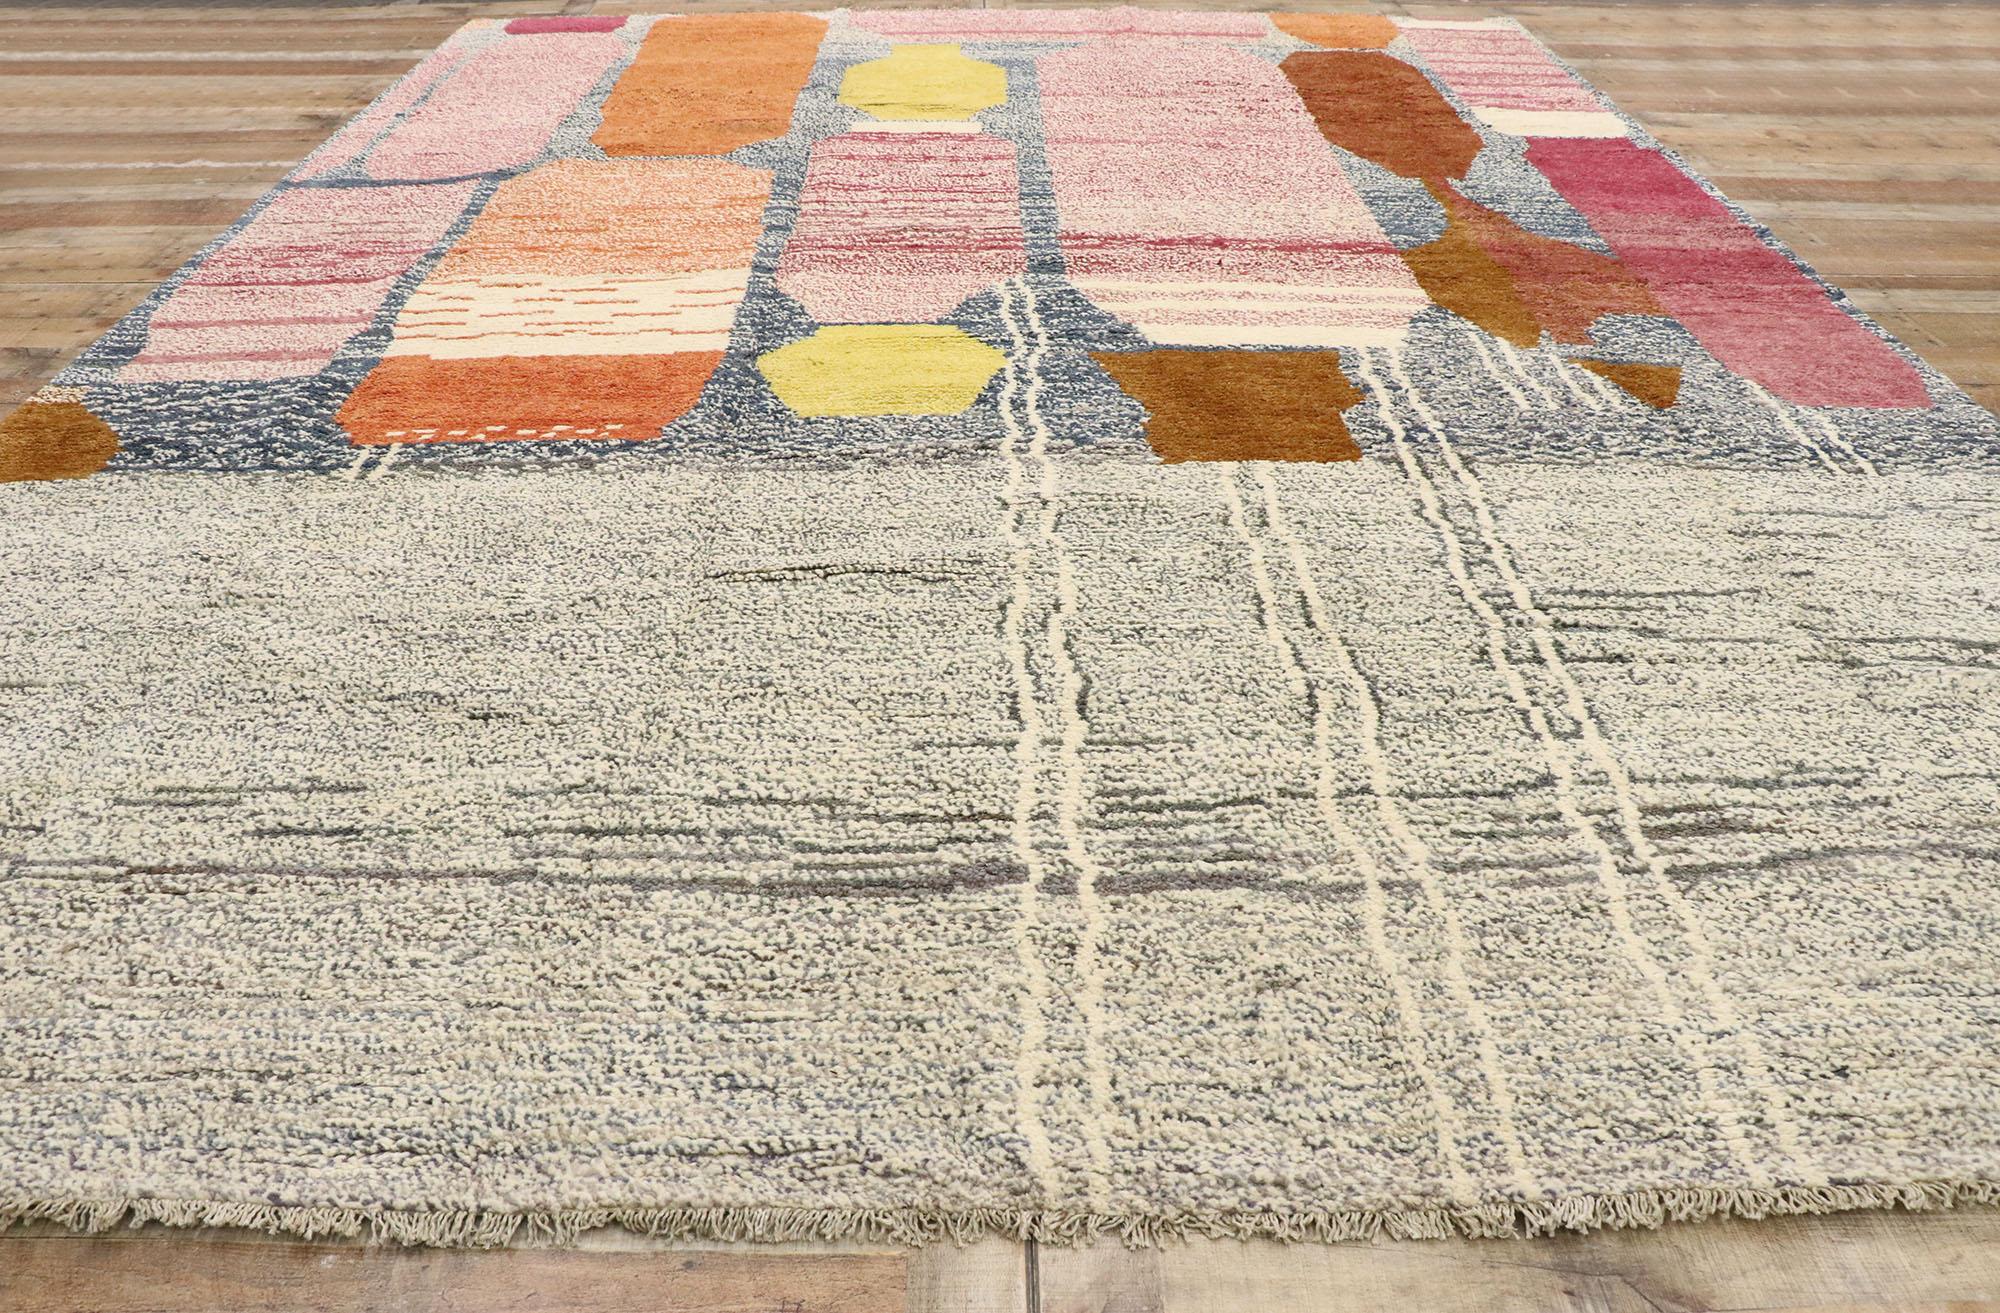 Modern Moroccan Rug Inspired by Paul Klee, Cubism Meets Ultra Cozy For Sale 2